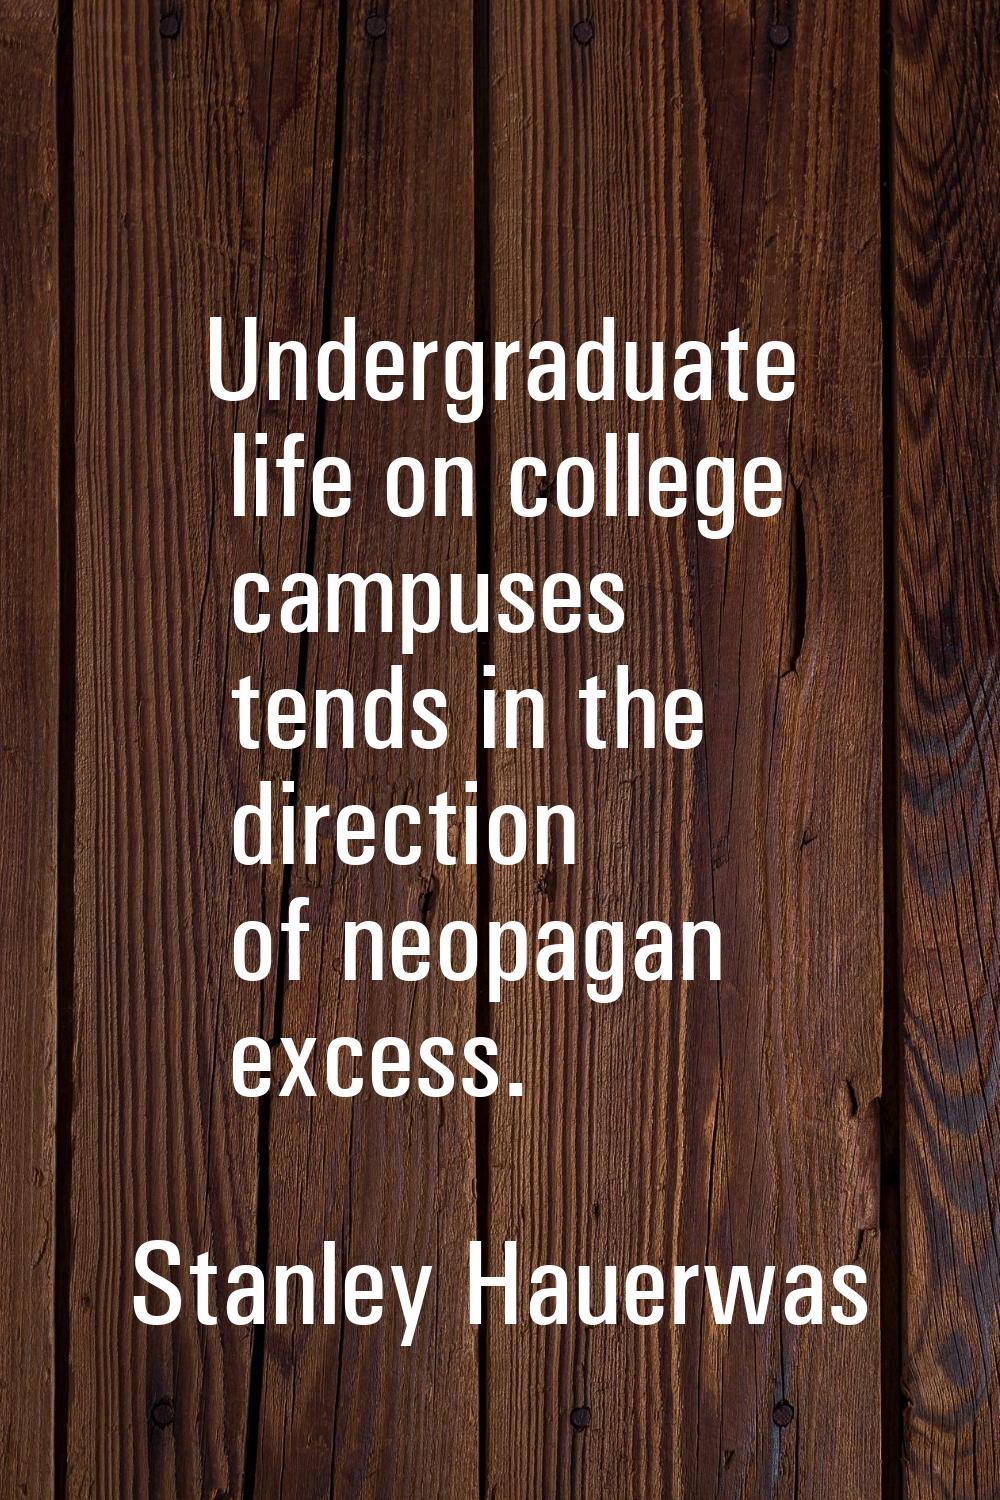 Undergraduate life on college campuses tends in the direction of neopagan excess.